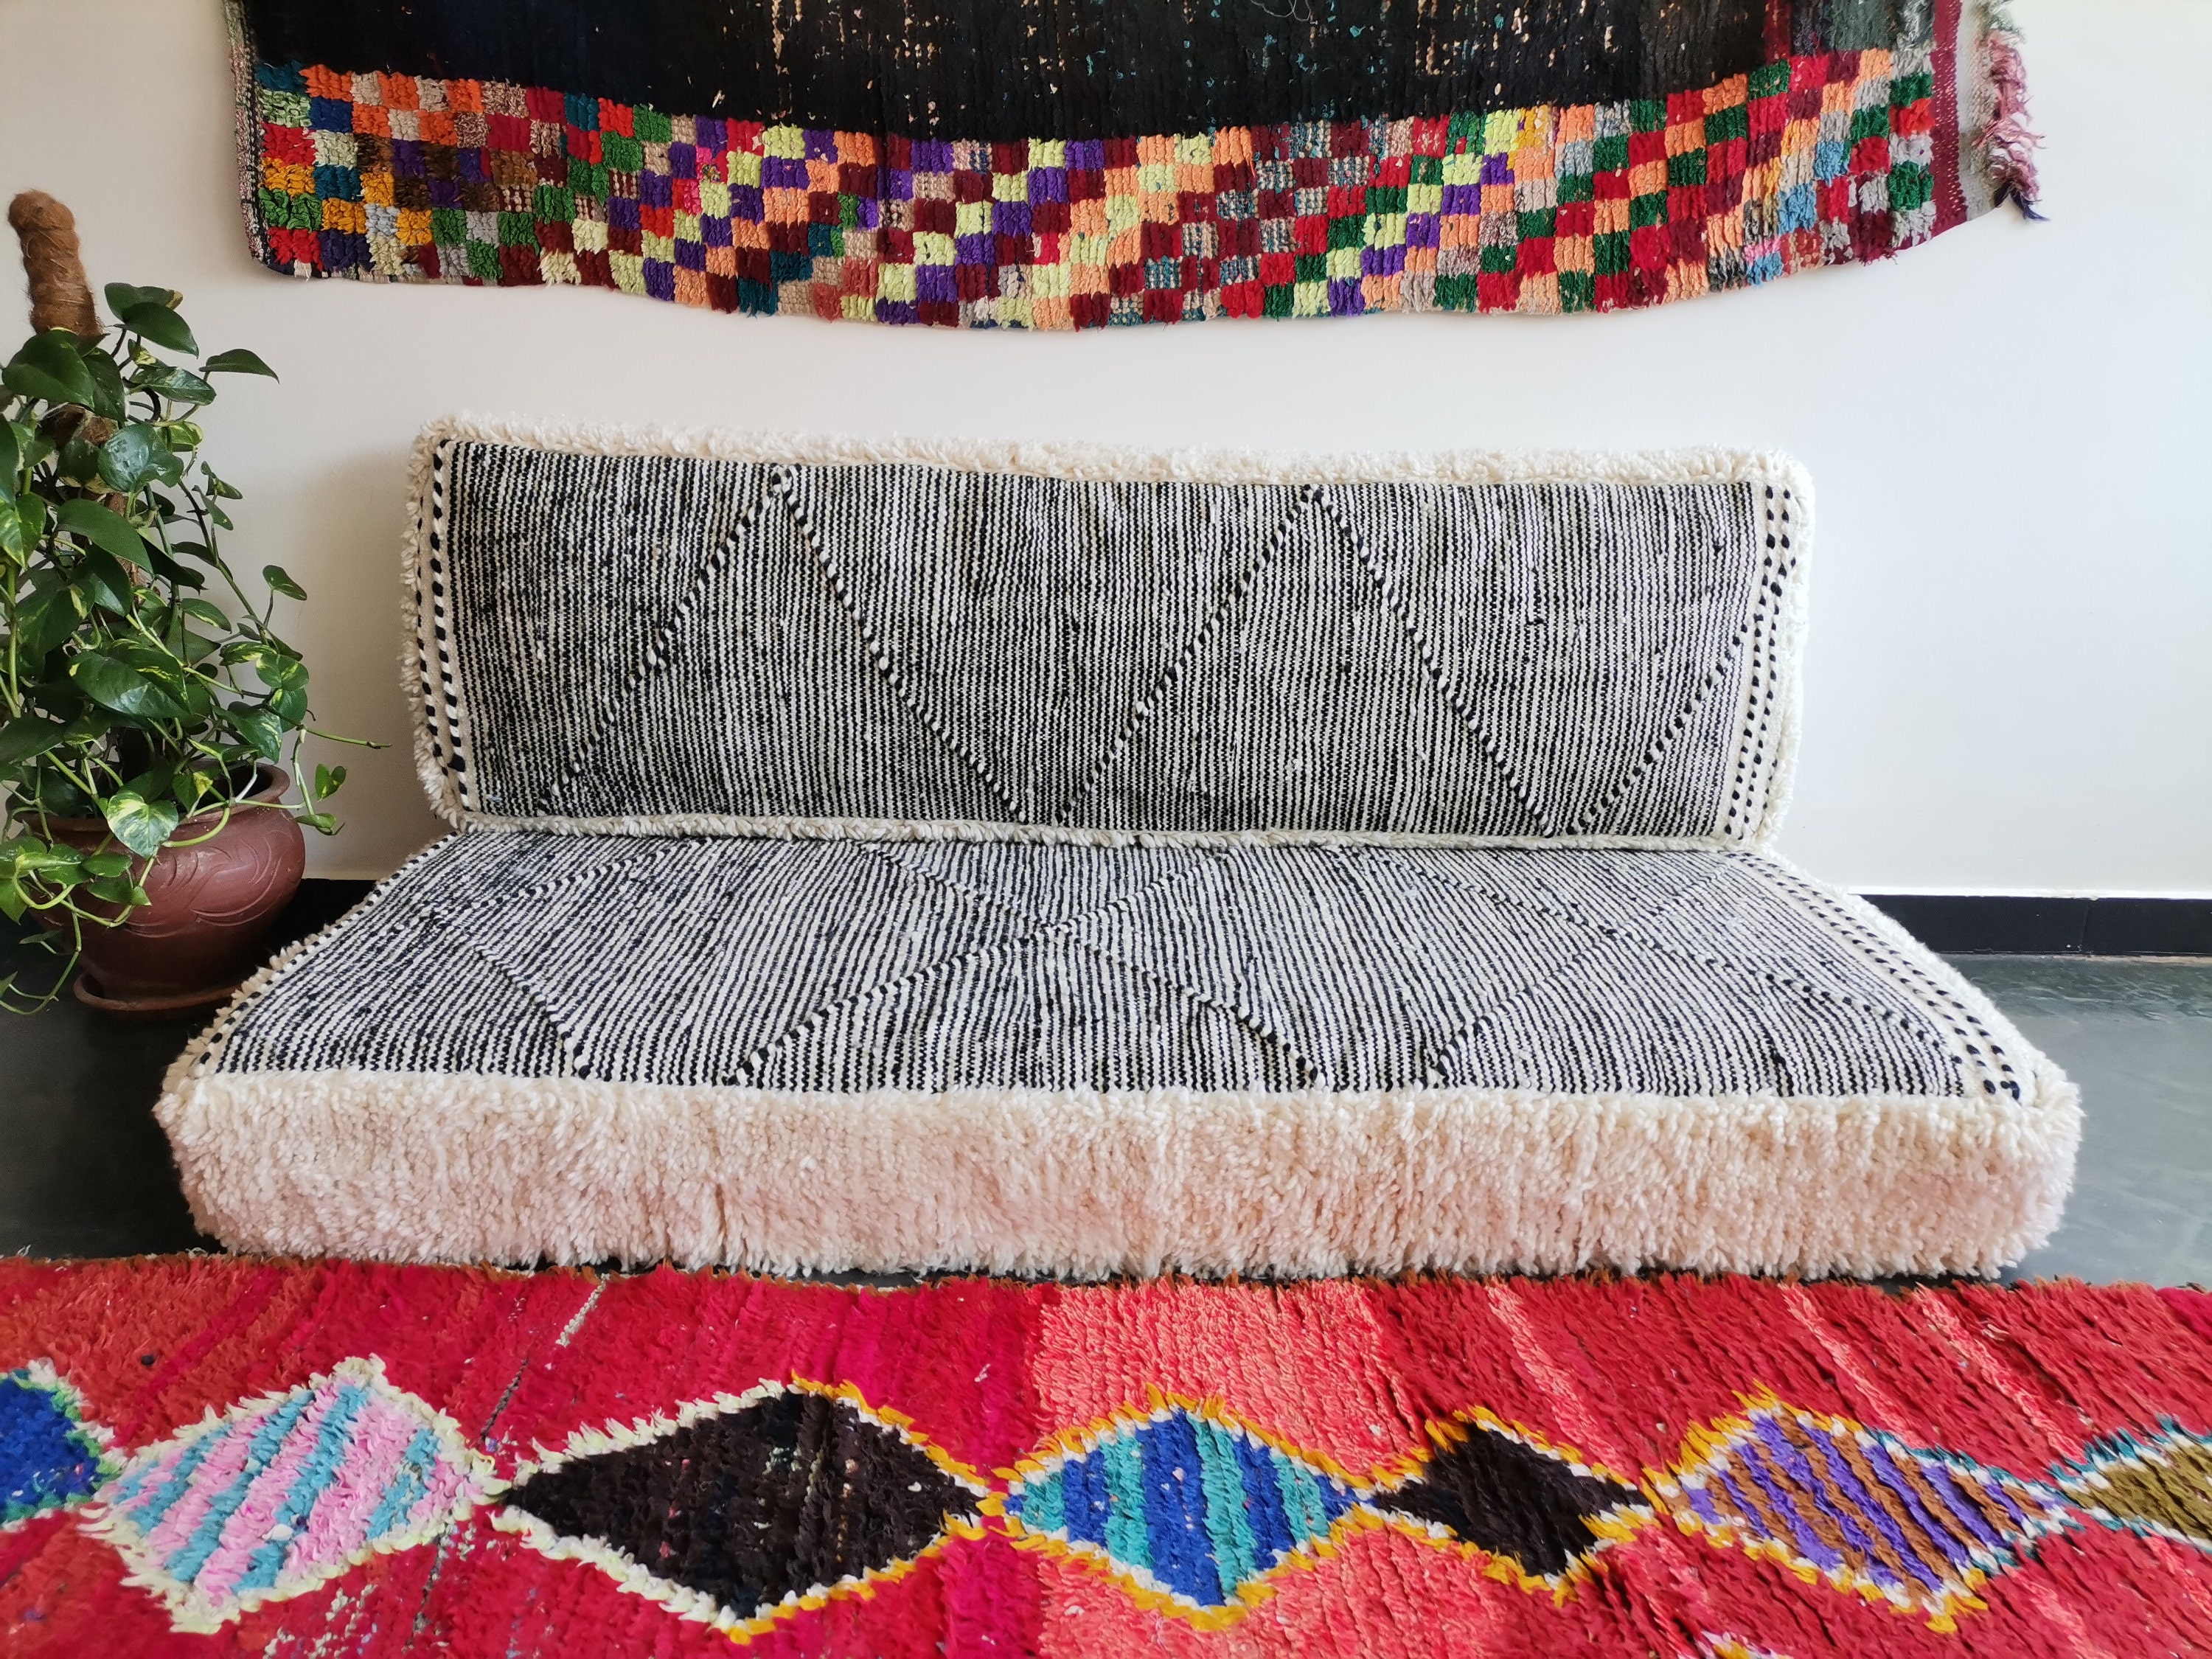 5 Ways To Fill A Large Floor Cushion - Bring On The Boho